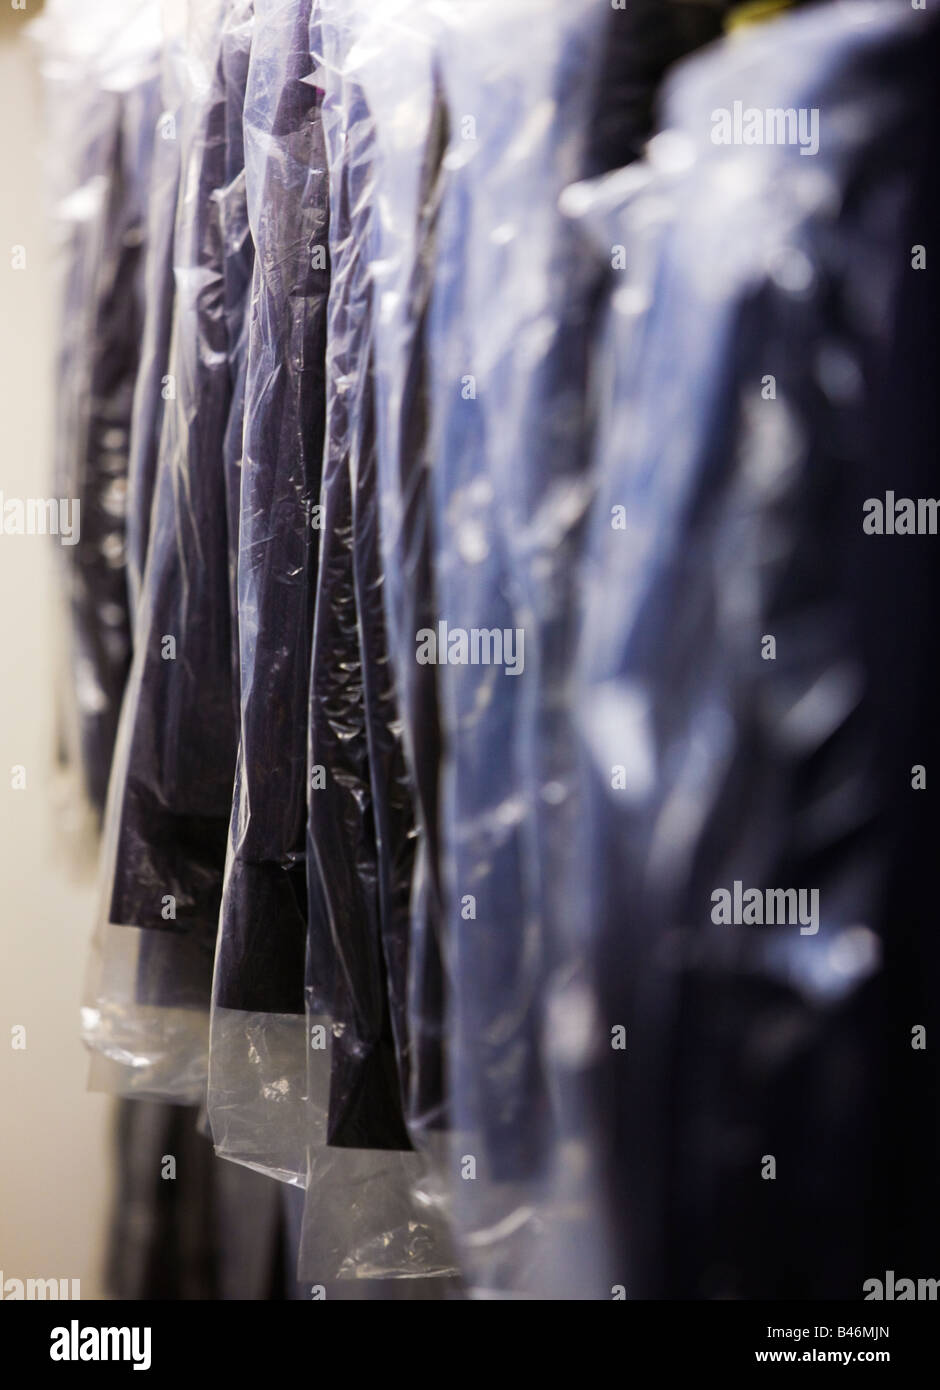 Dry cleaners, cleaning shop with cleaned suits on a rack Stock Photo